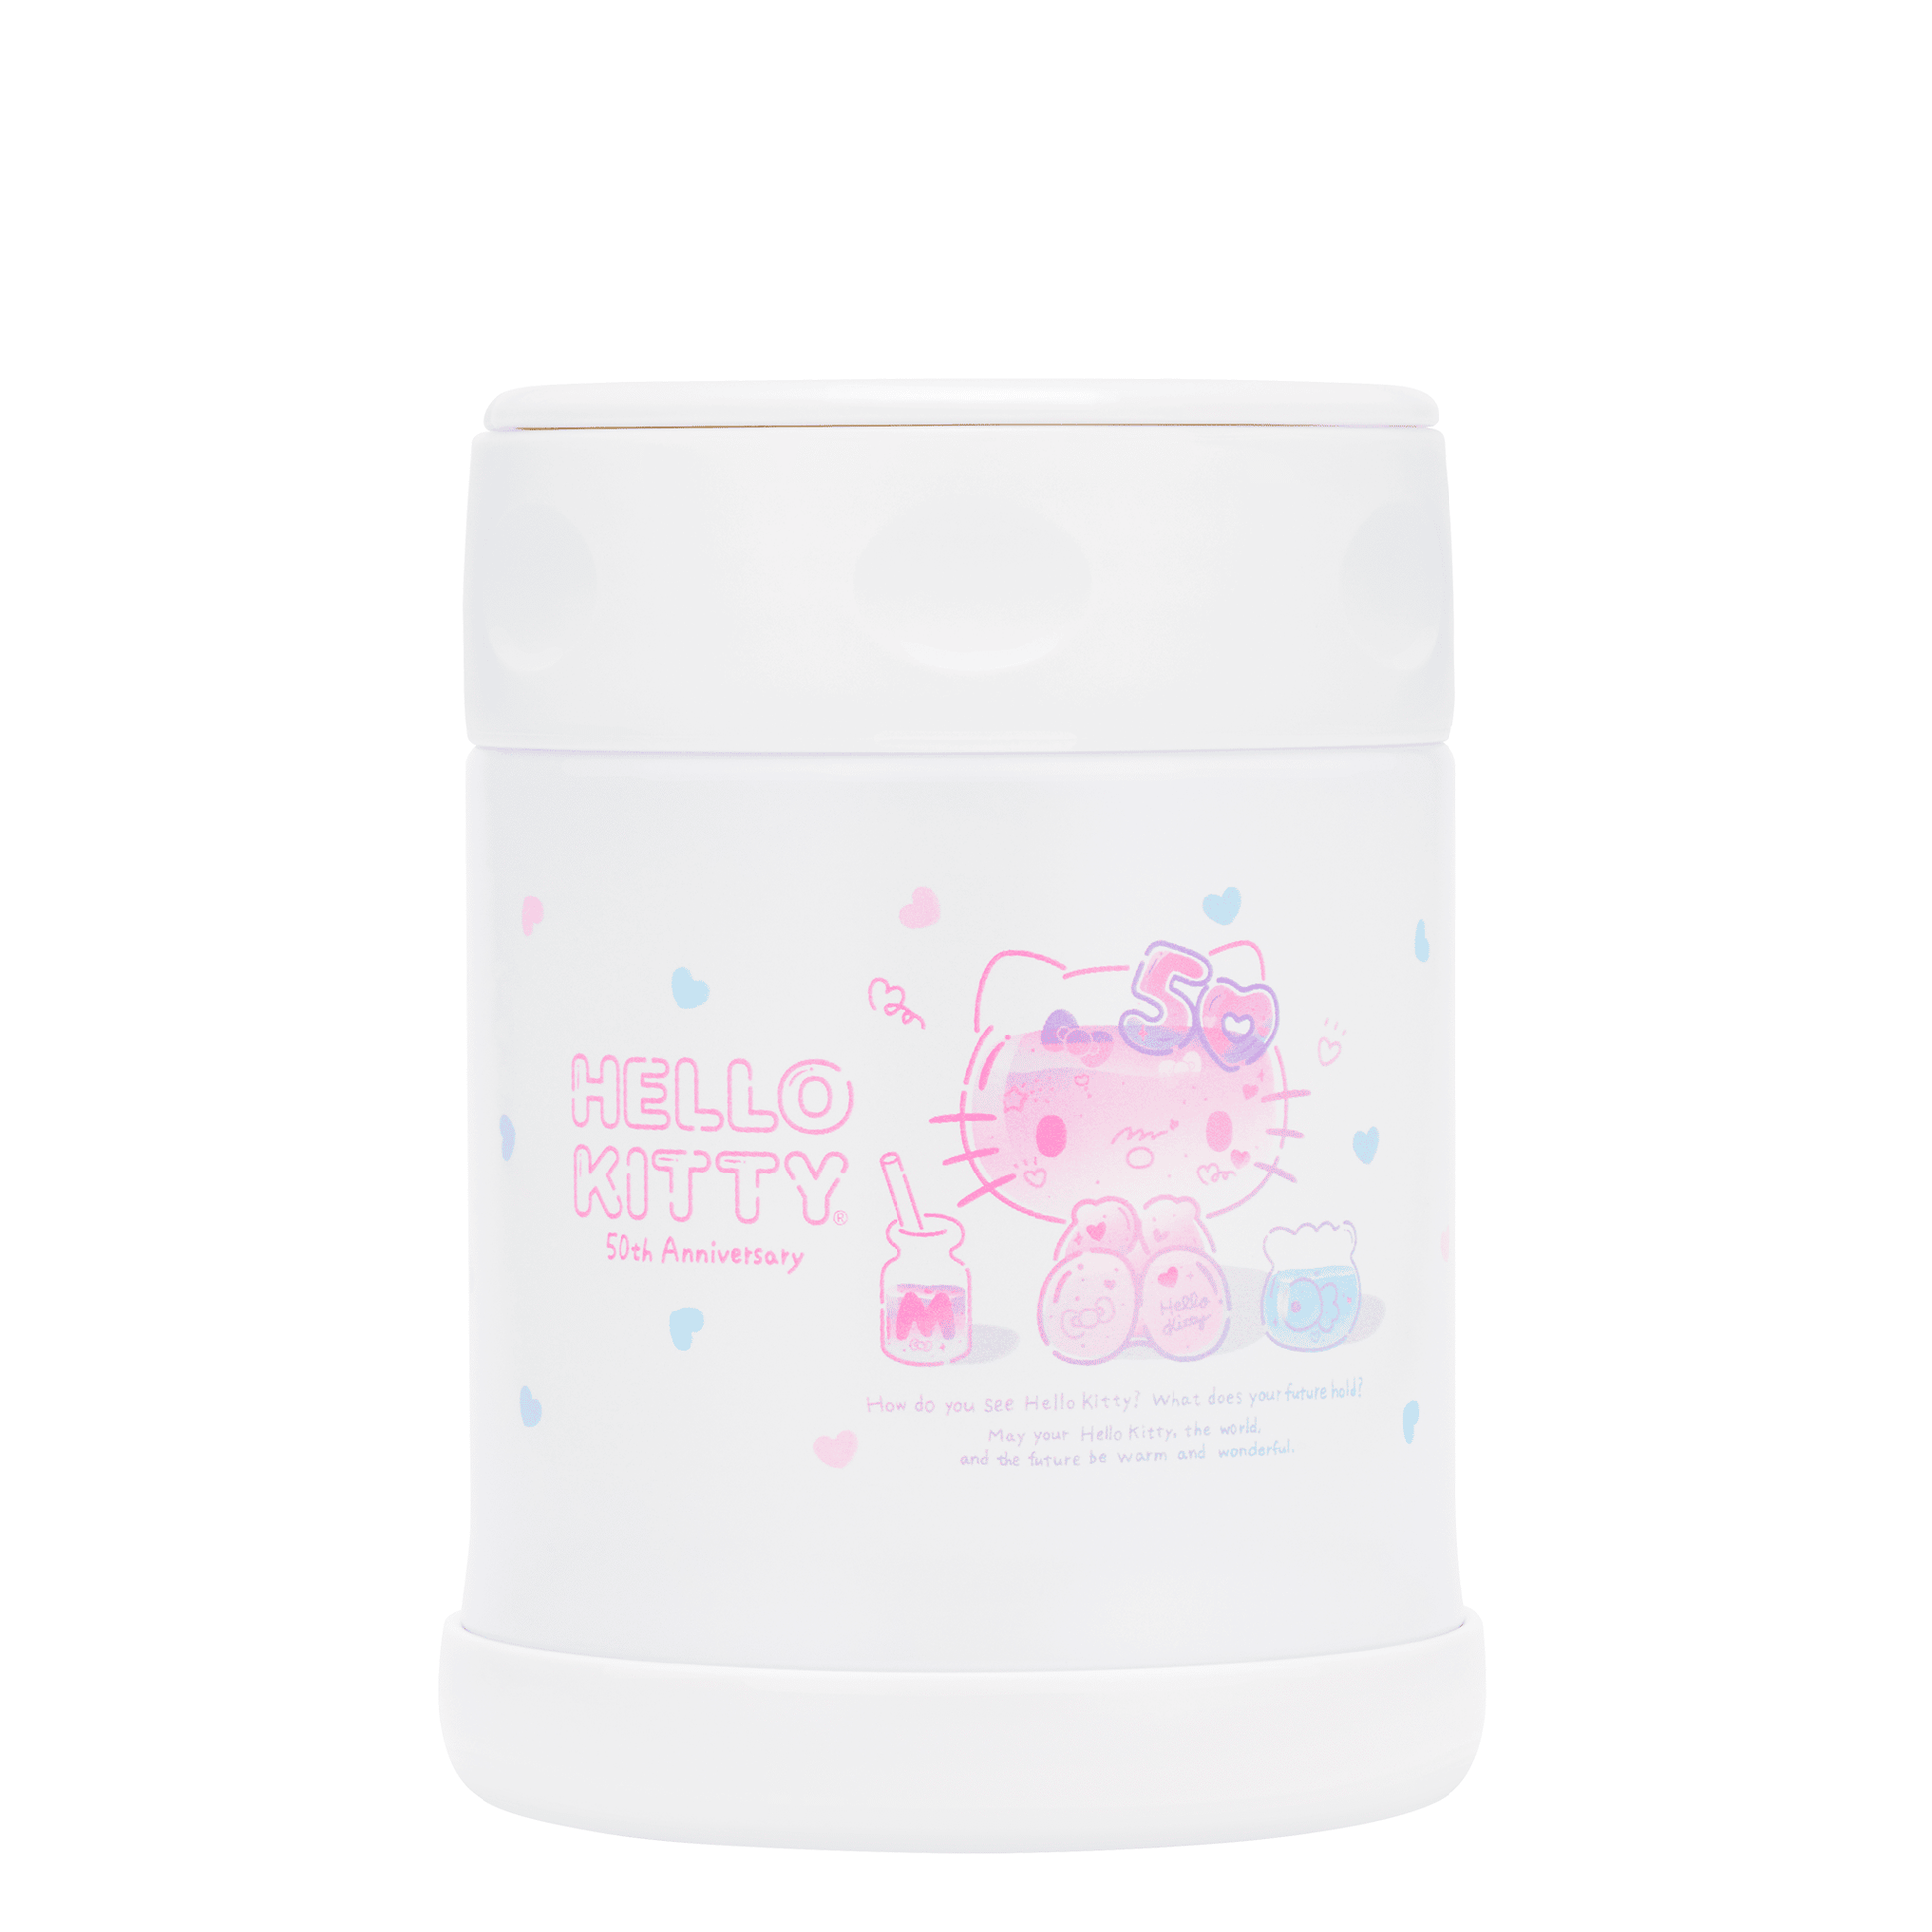 HELLO KITTY® 50th Anniversary Stainless Steel Food Jar SW-EAE35KT